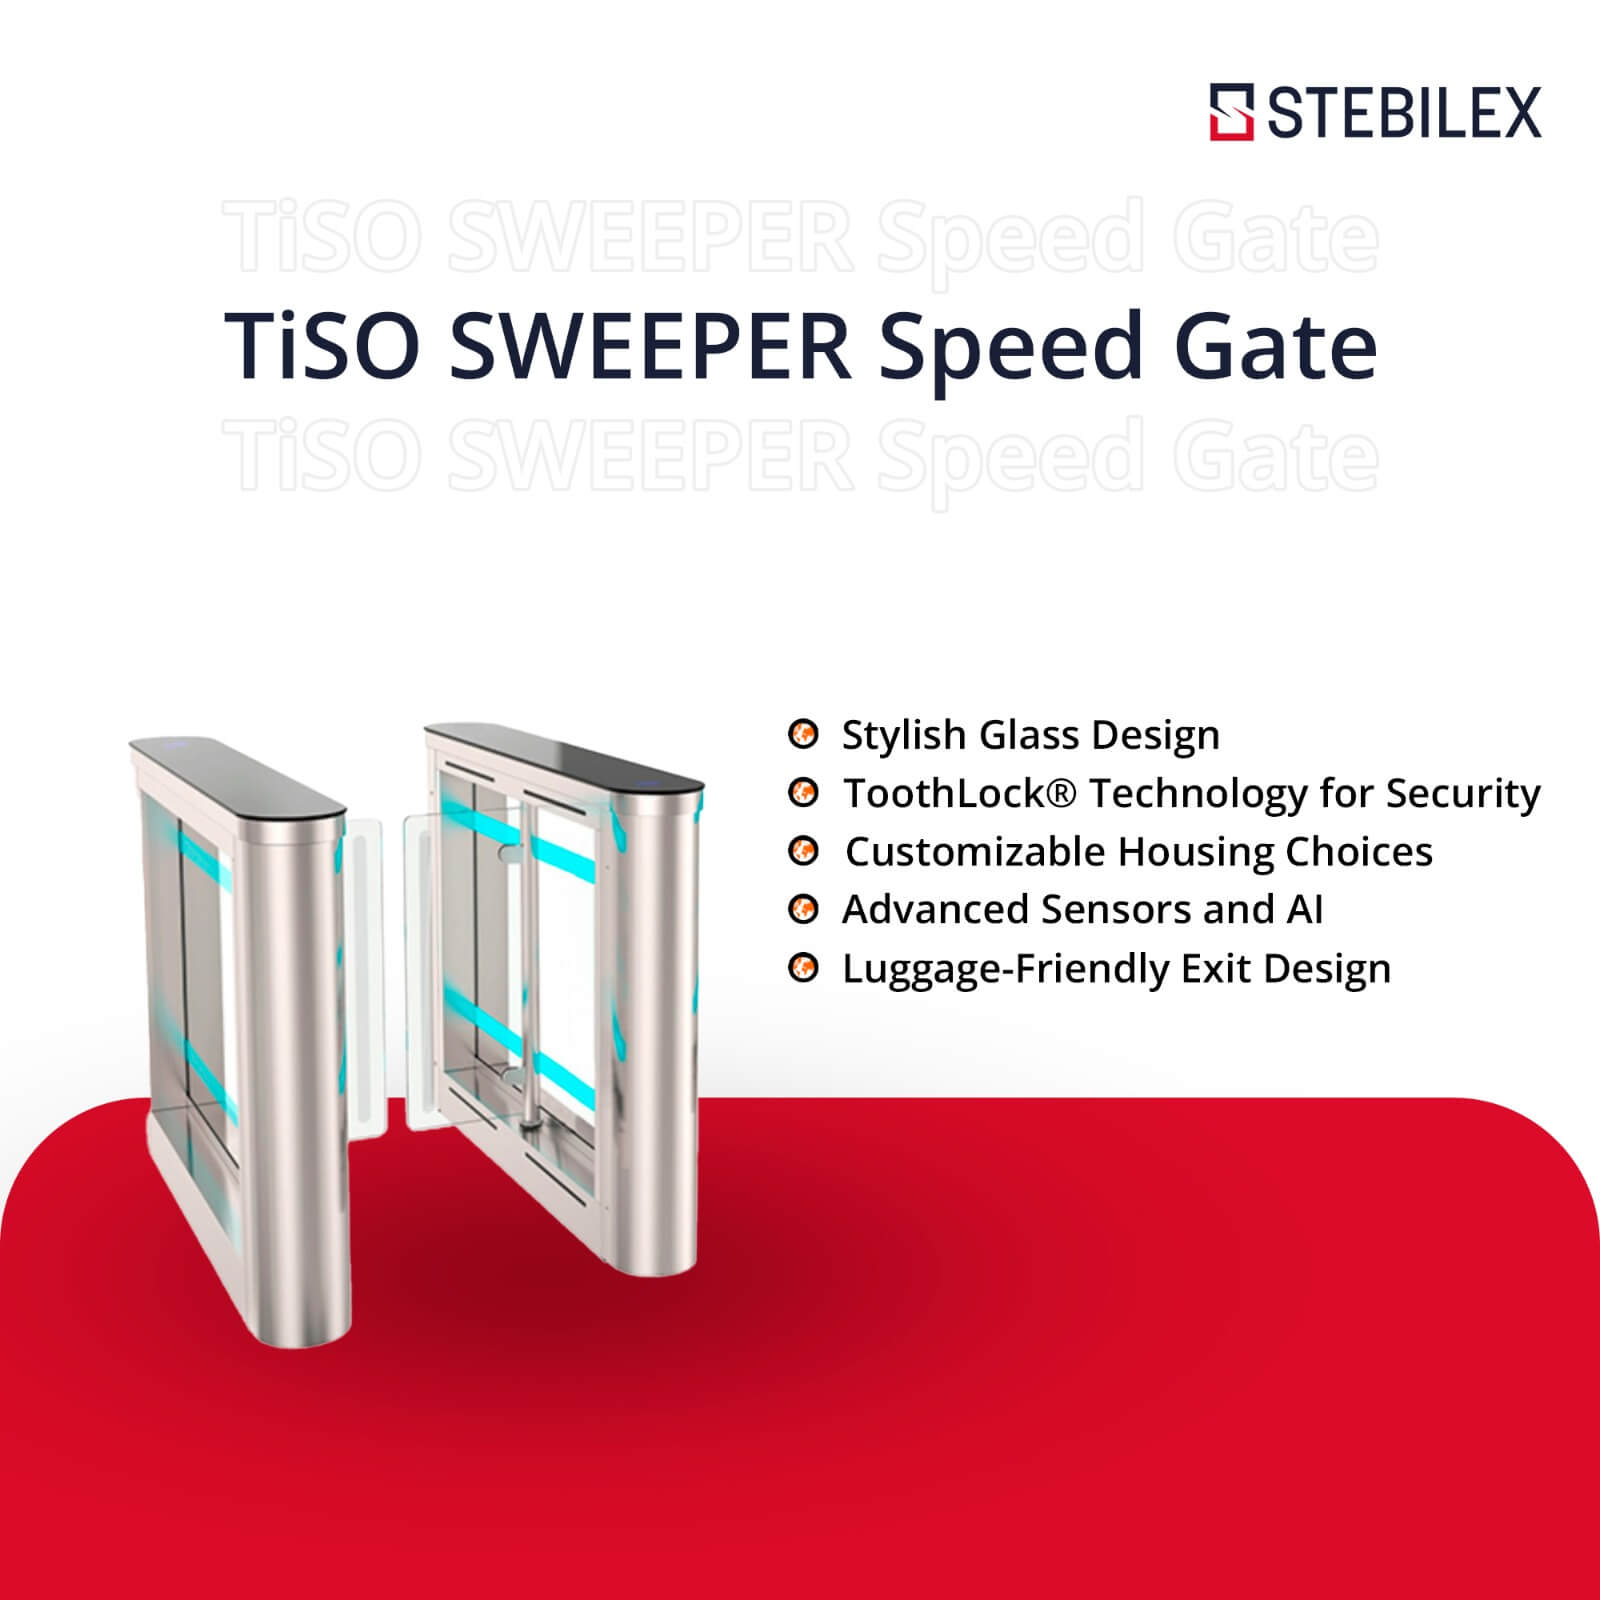 TiSO SWEEPER Speed Gate